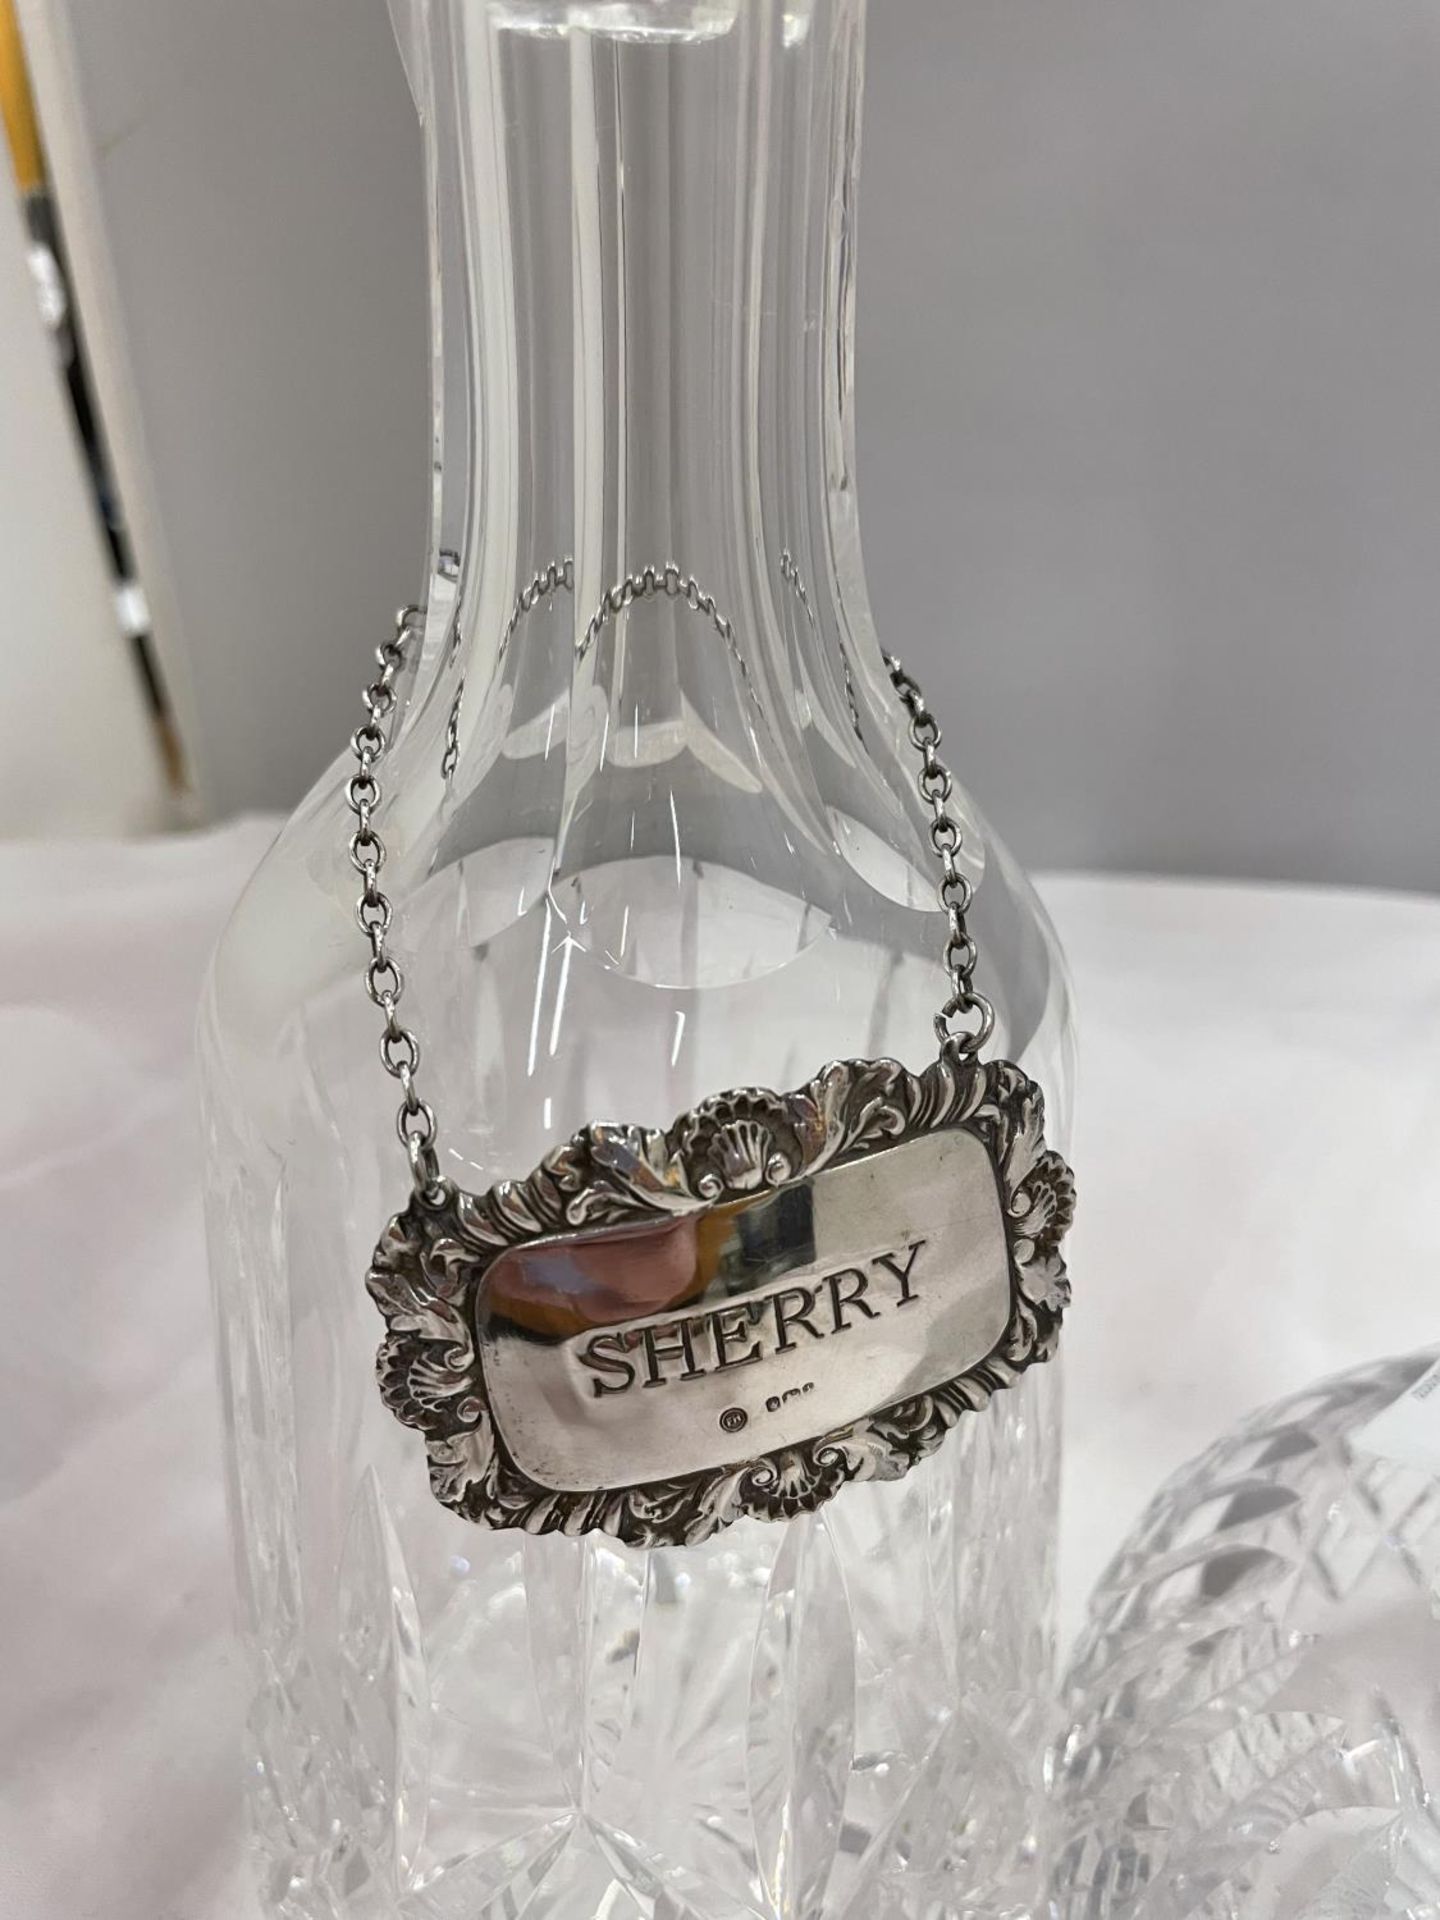 TWO CUT GLASS DECANTERS, ONE WITH A SILVER 'SHERRY' COLLAR - Image 2 of 4